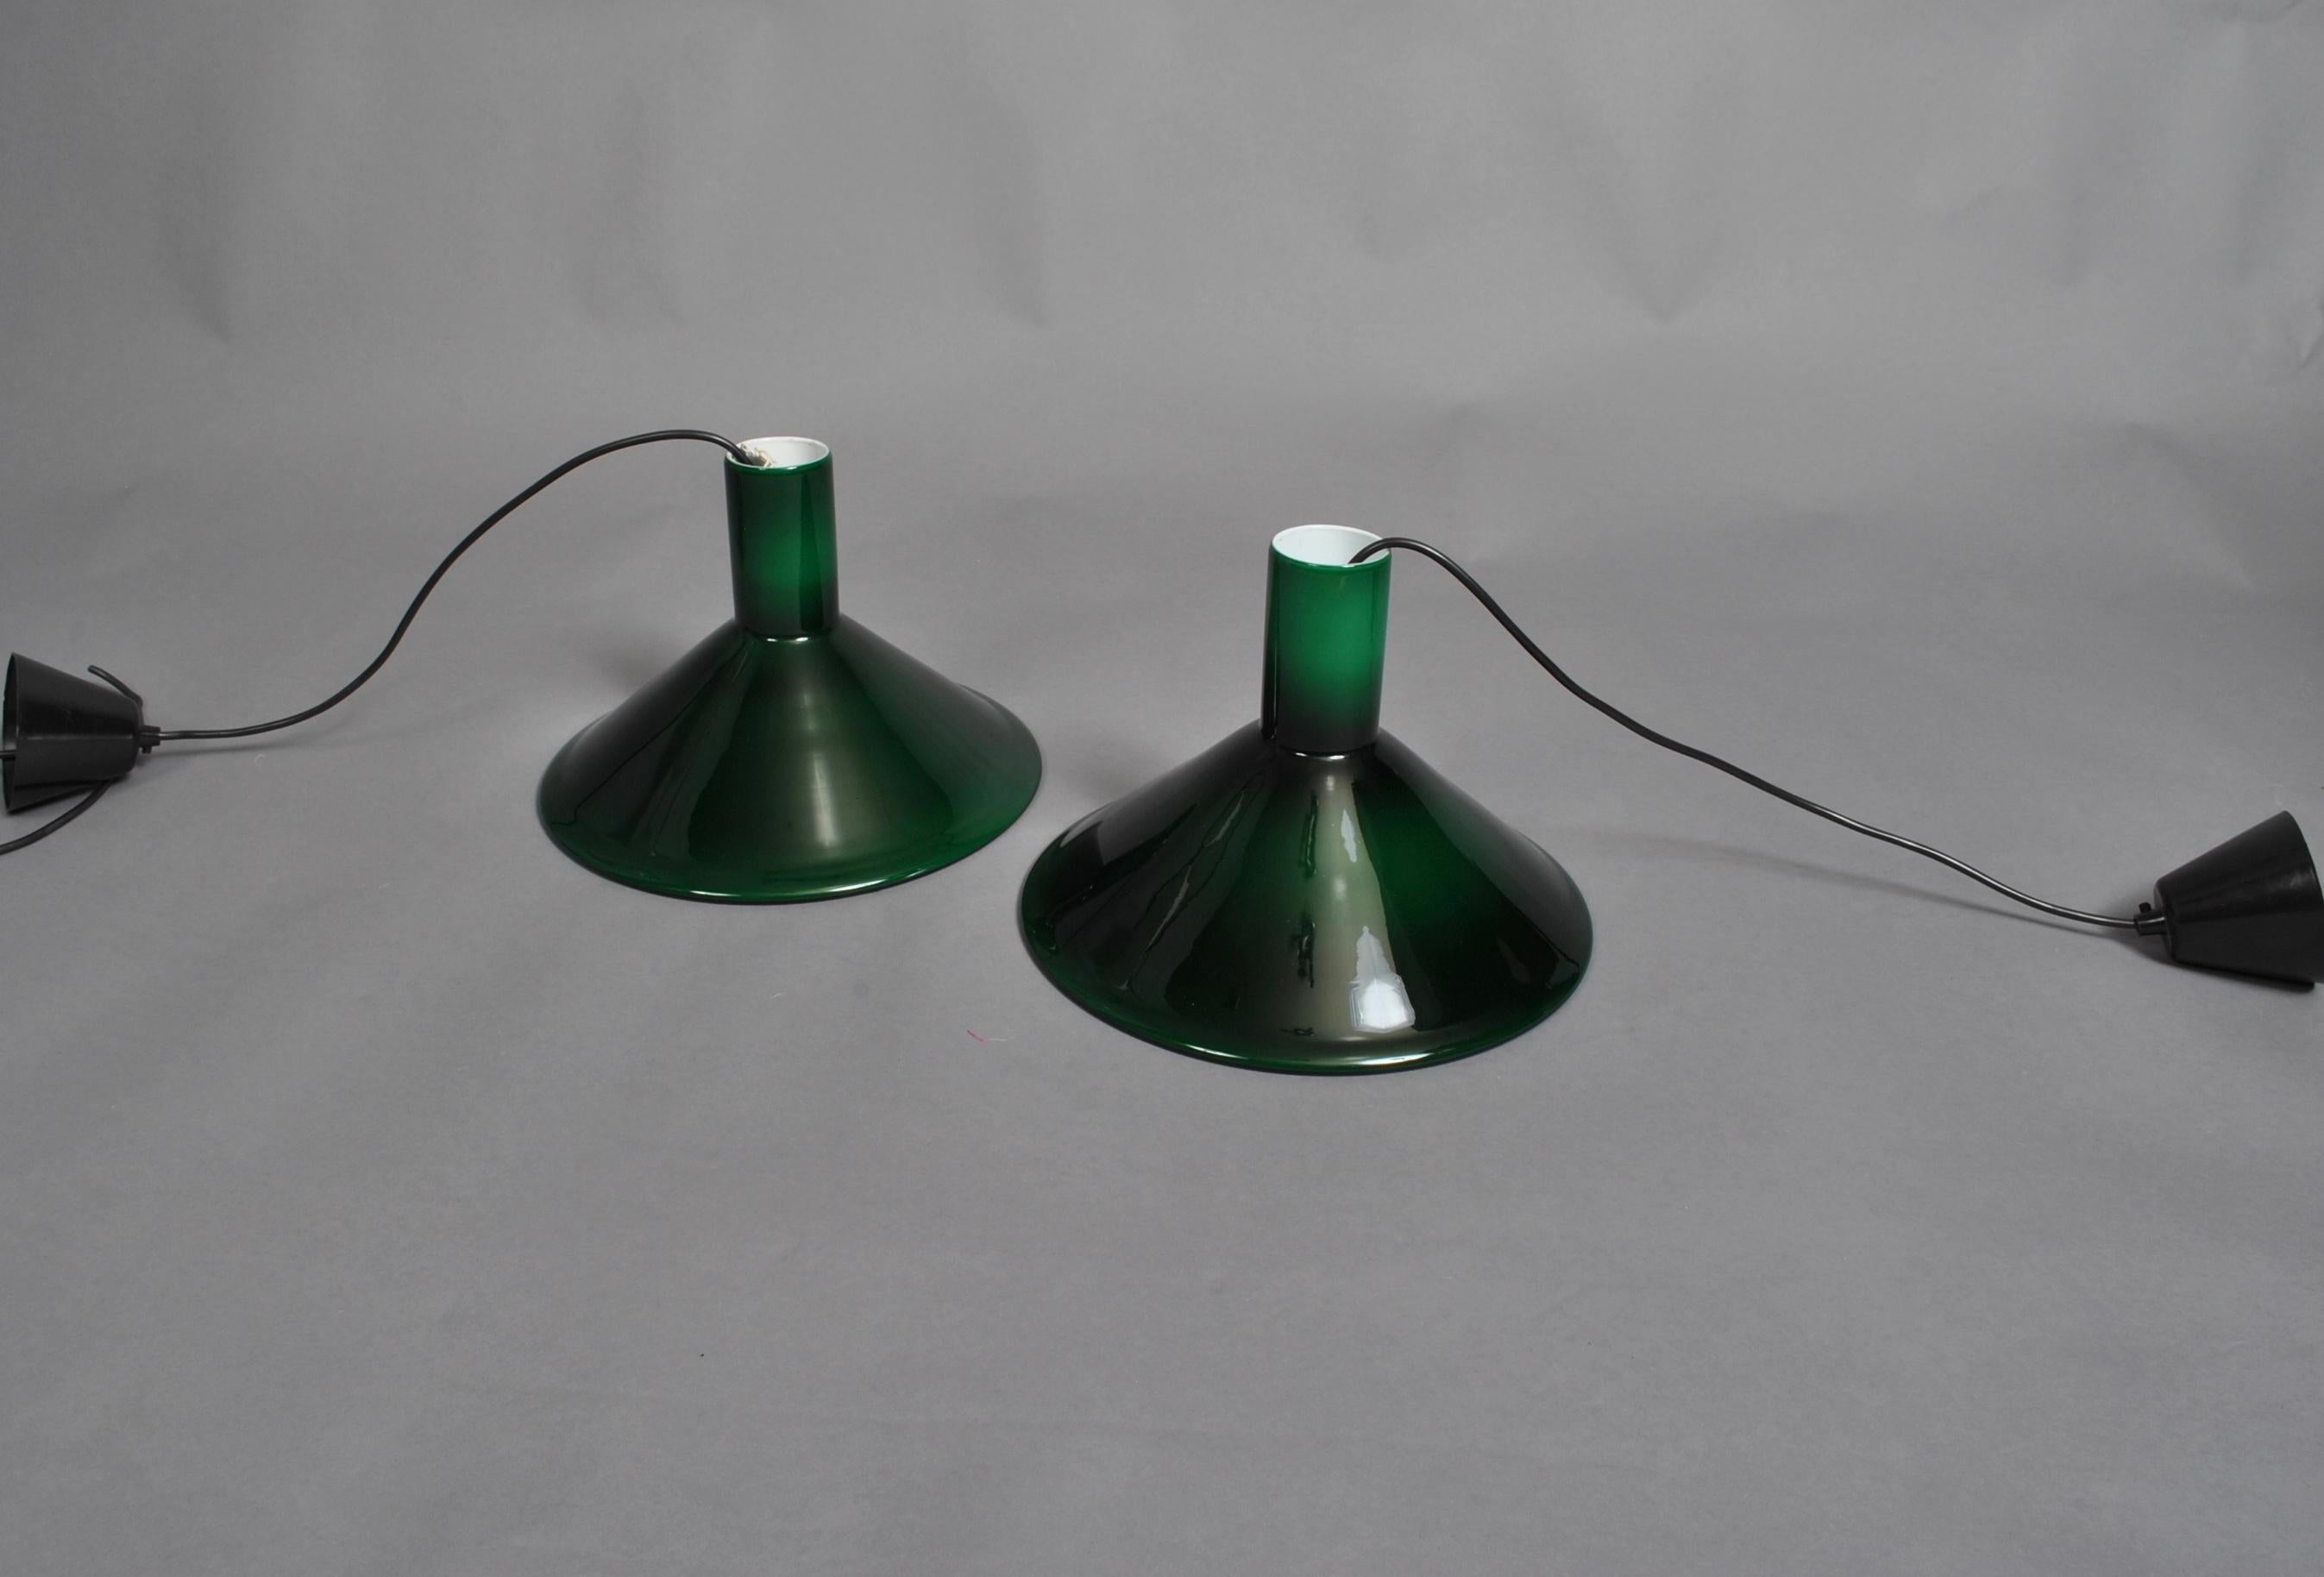 A pair of P&T pendant lights designed by Michael Bang for Holmegaard, 1972. Perfect midcentury accents. 
Green Holmegaard glass with white inner casing. Cable can be height adjusted.